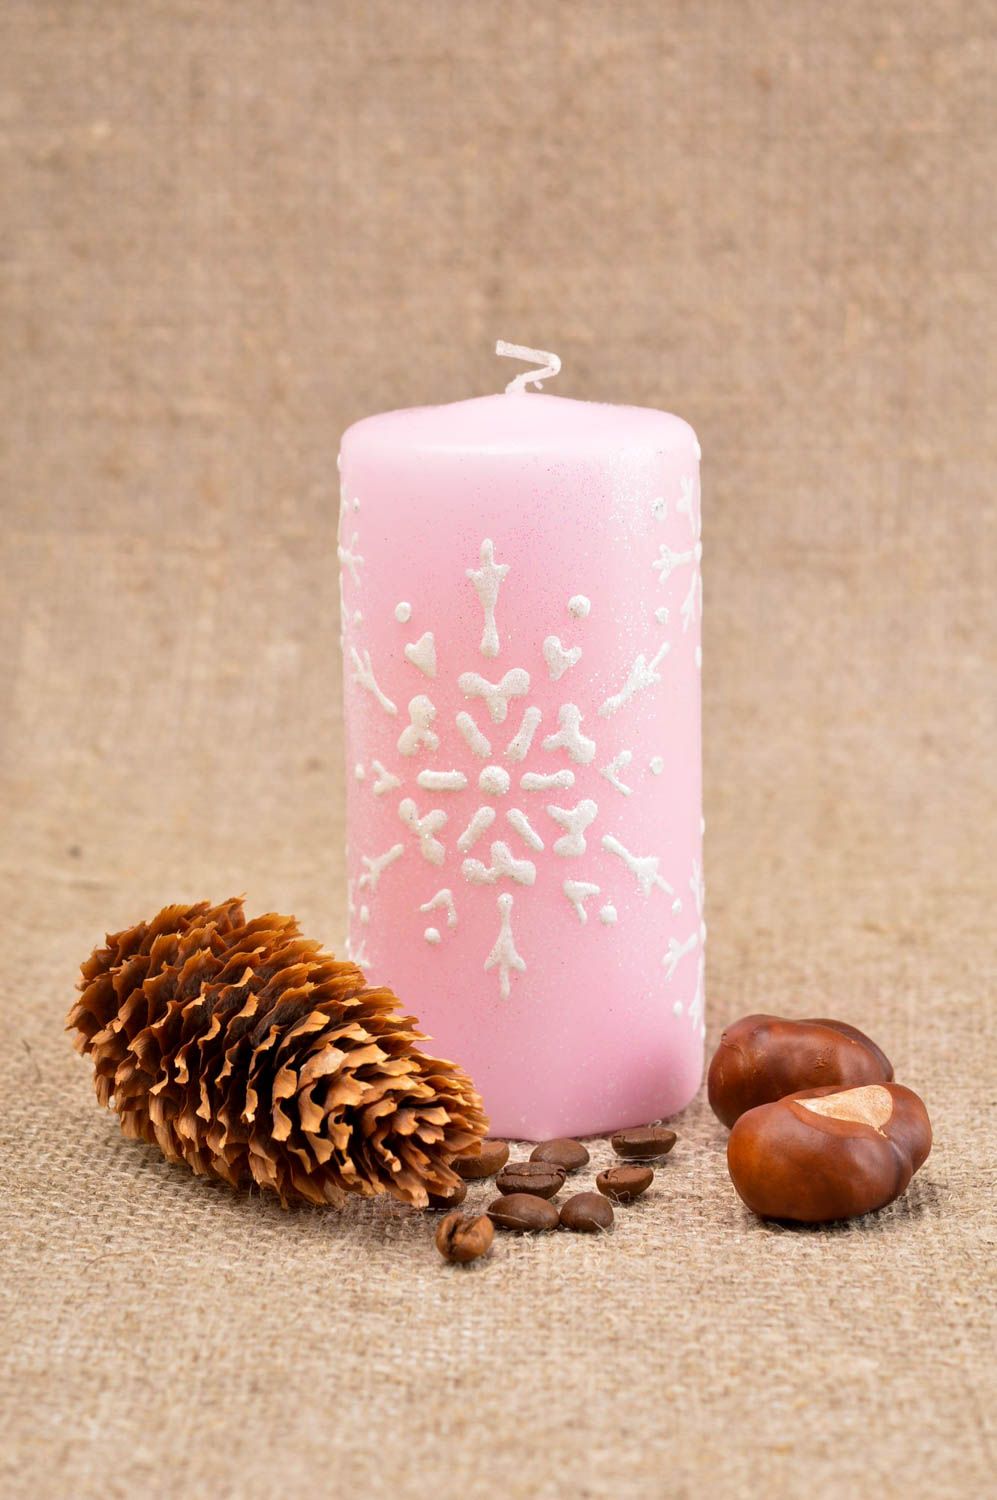 Handmade aroma candle designs festive candles home decoration gift ideas photo 2